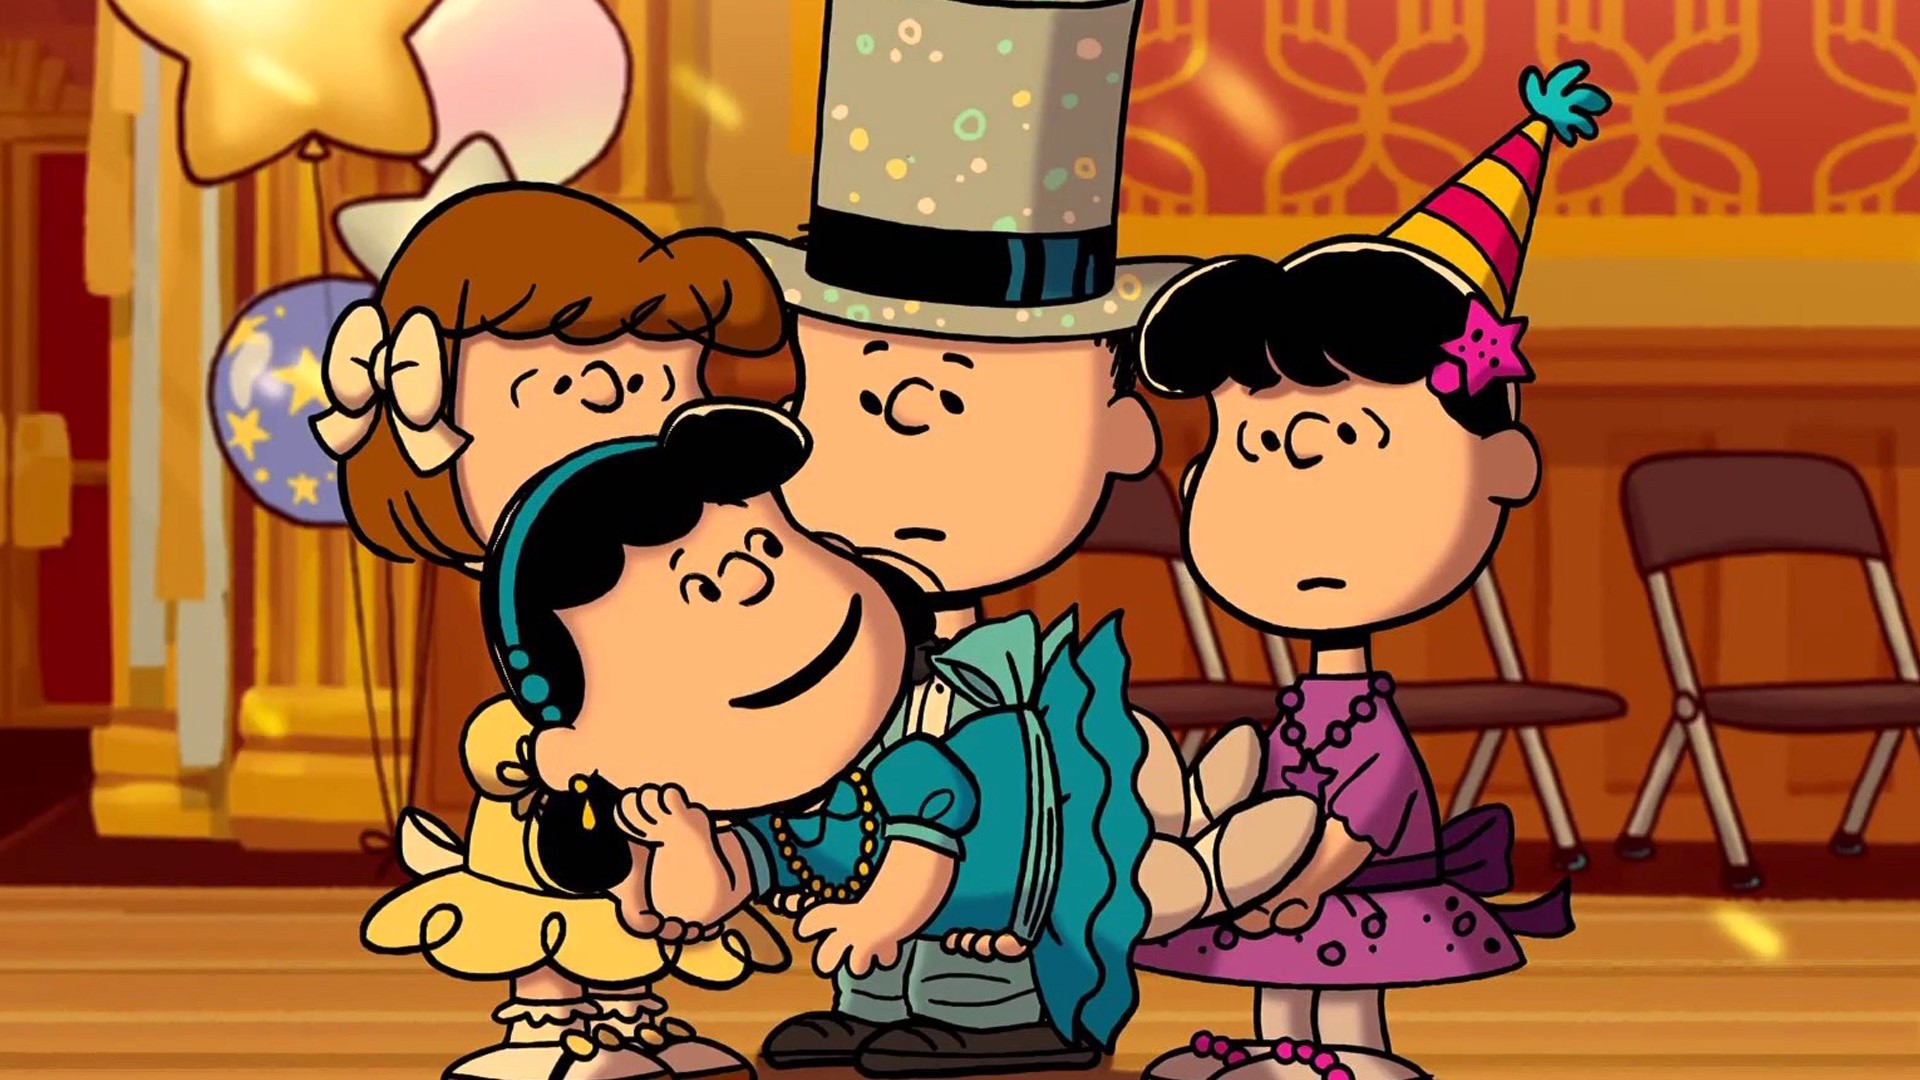 ‘Peanuts’ gang returns in new special: An exclusive look